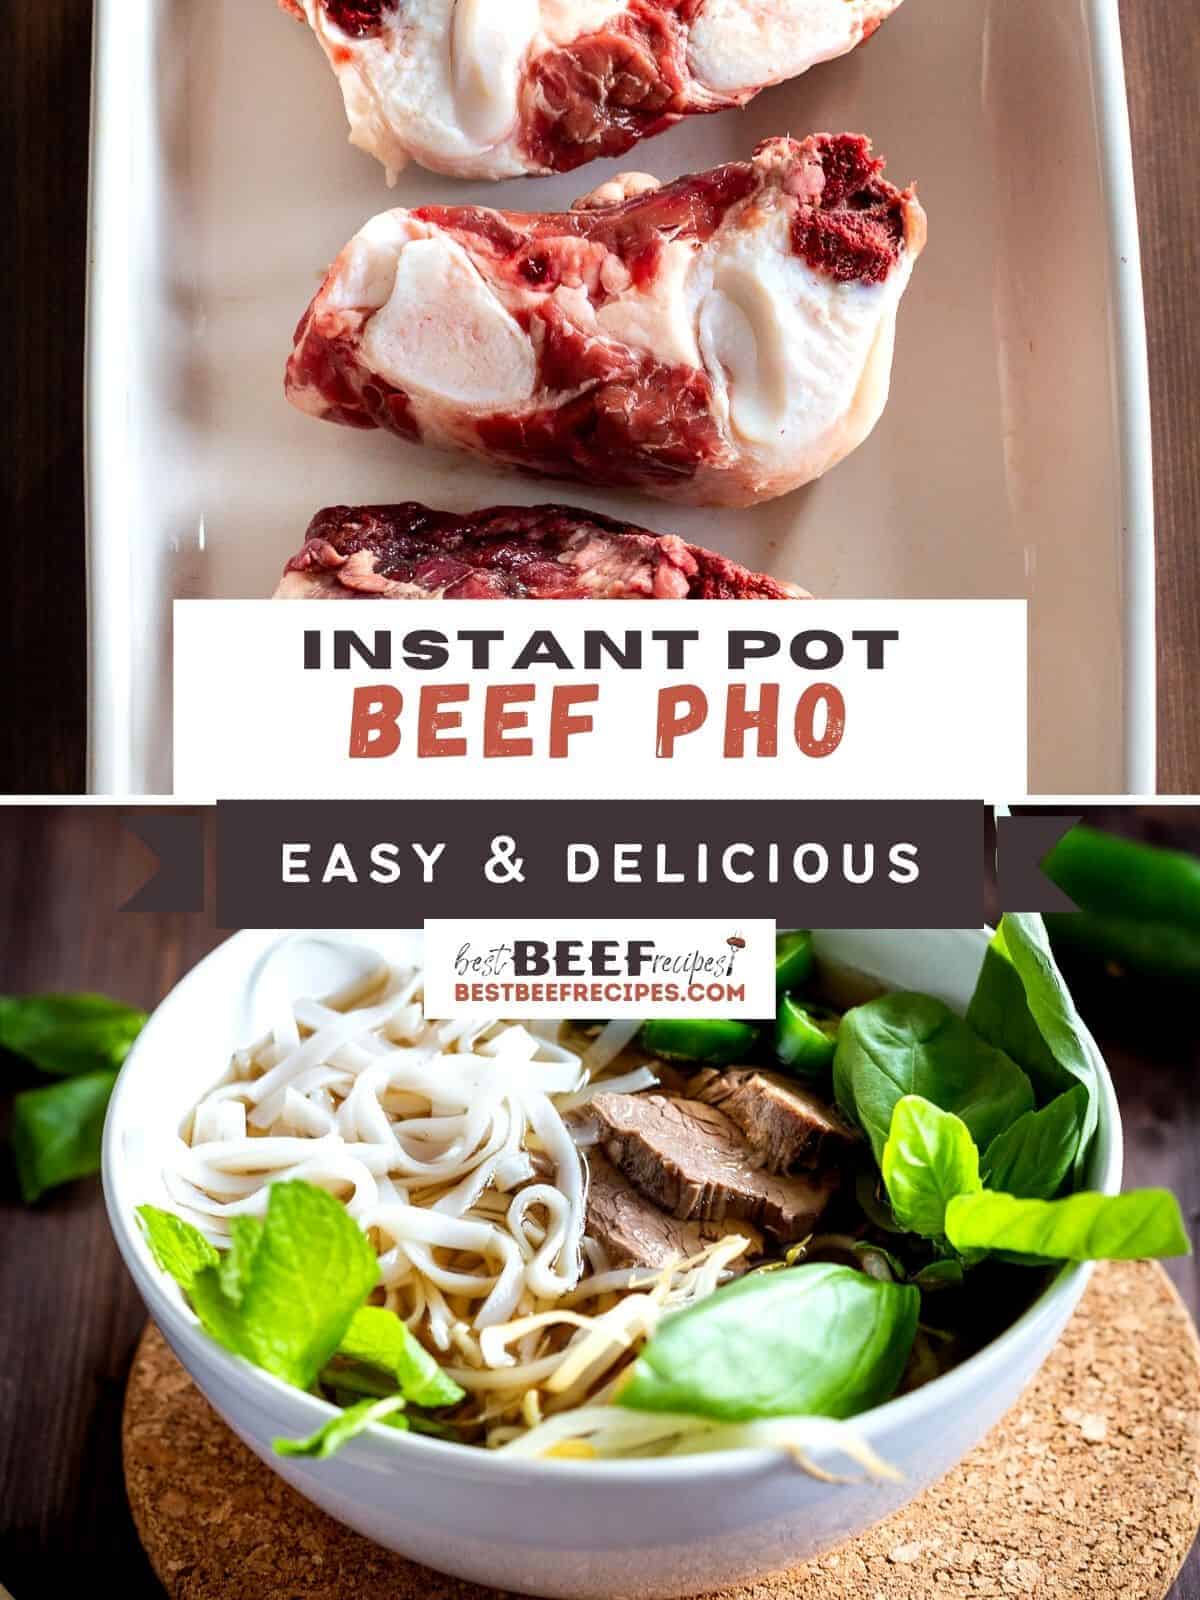 Instant pot beef pho cover image